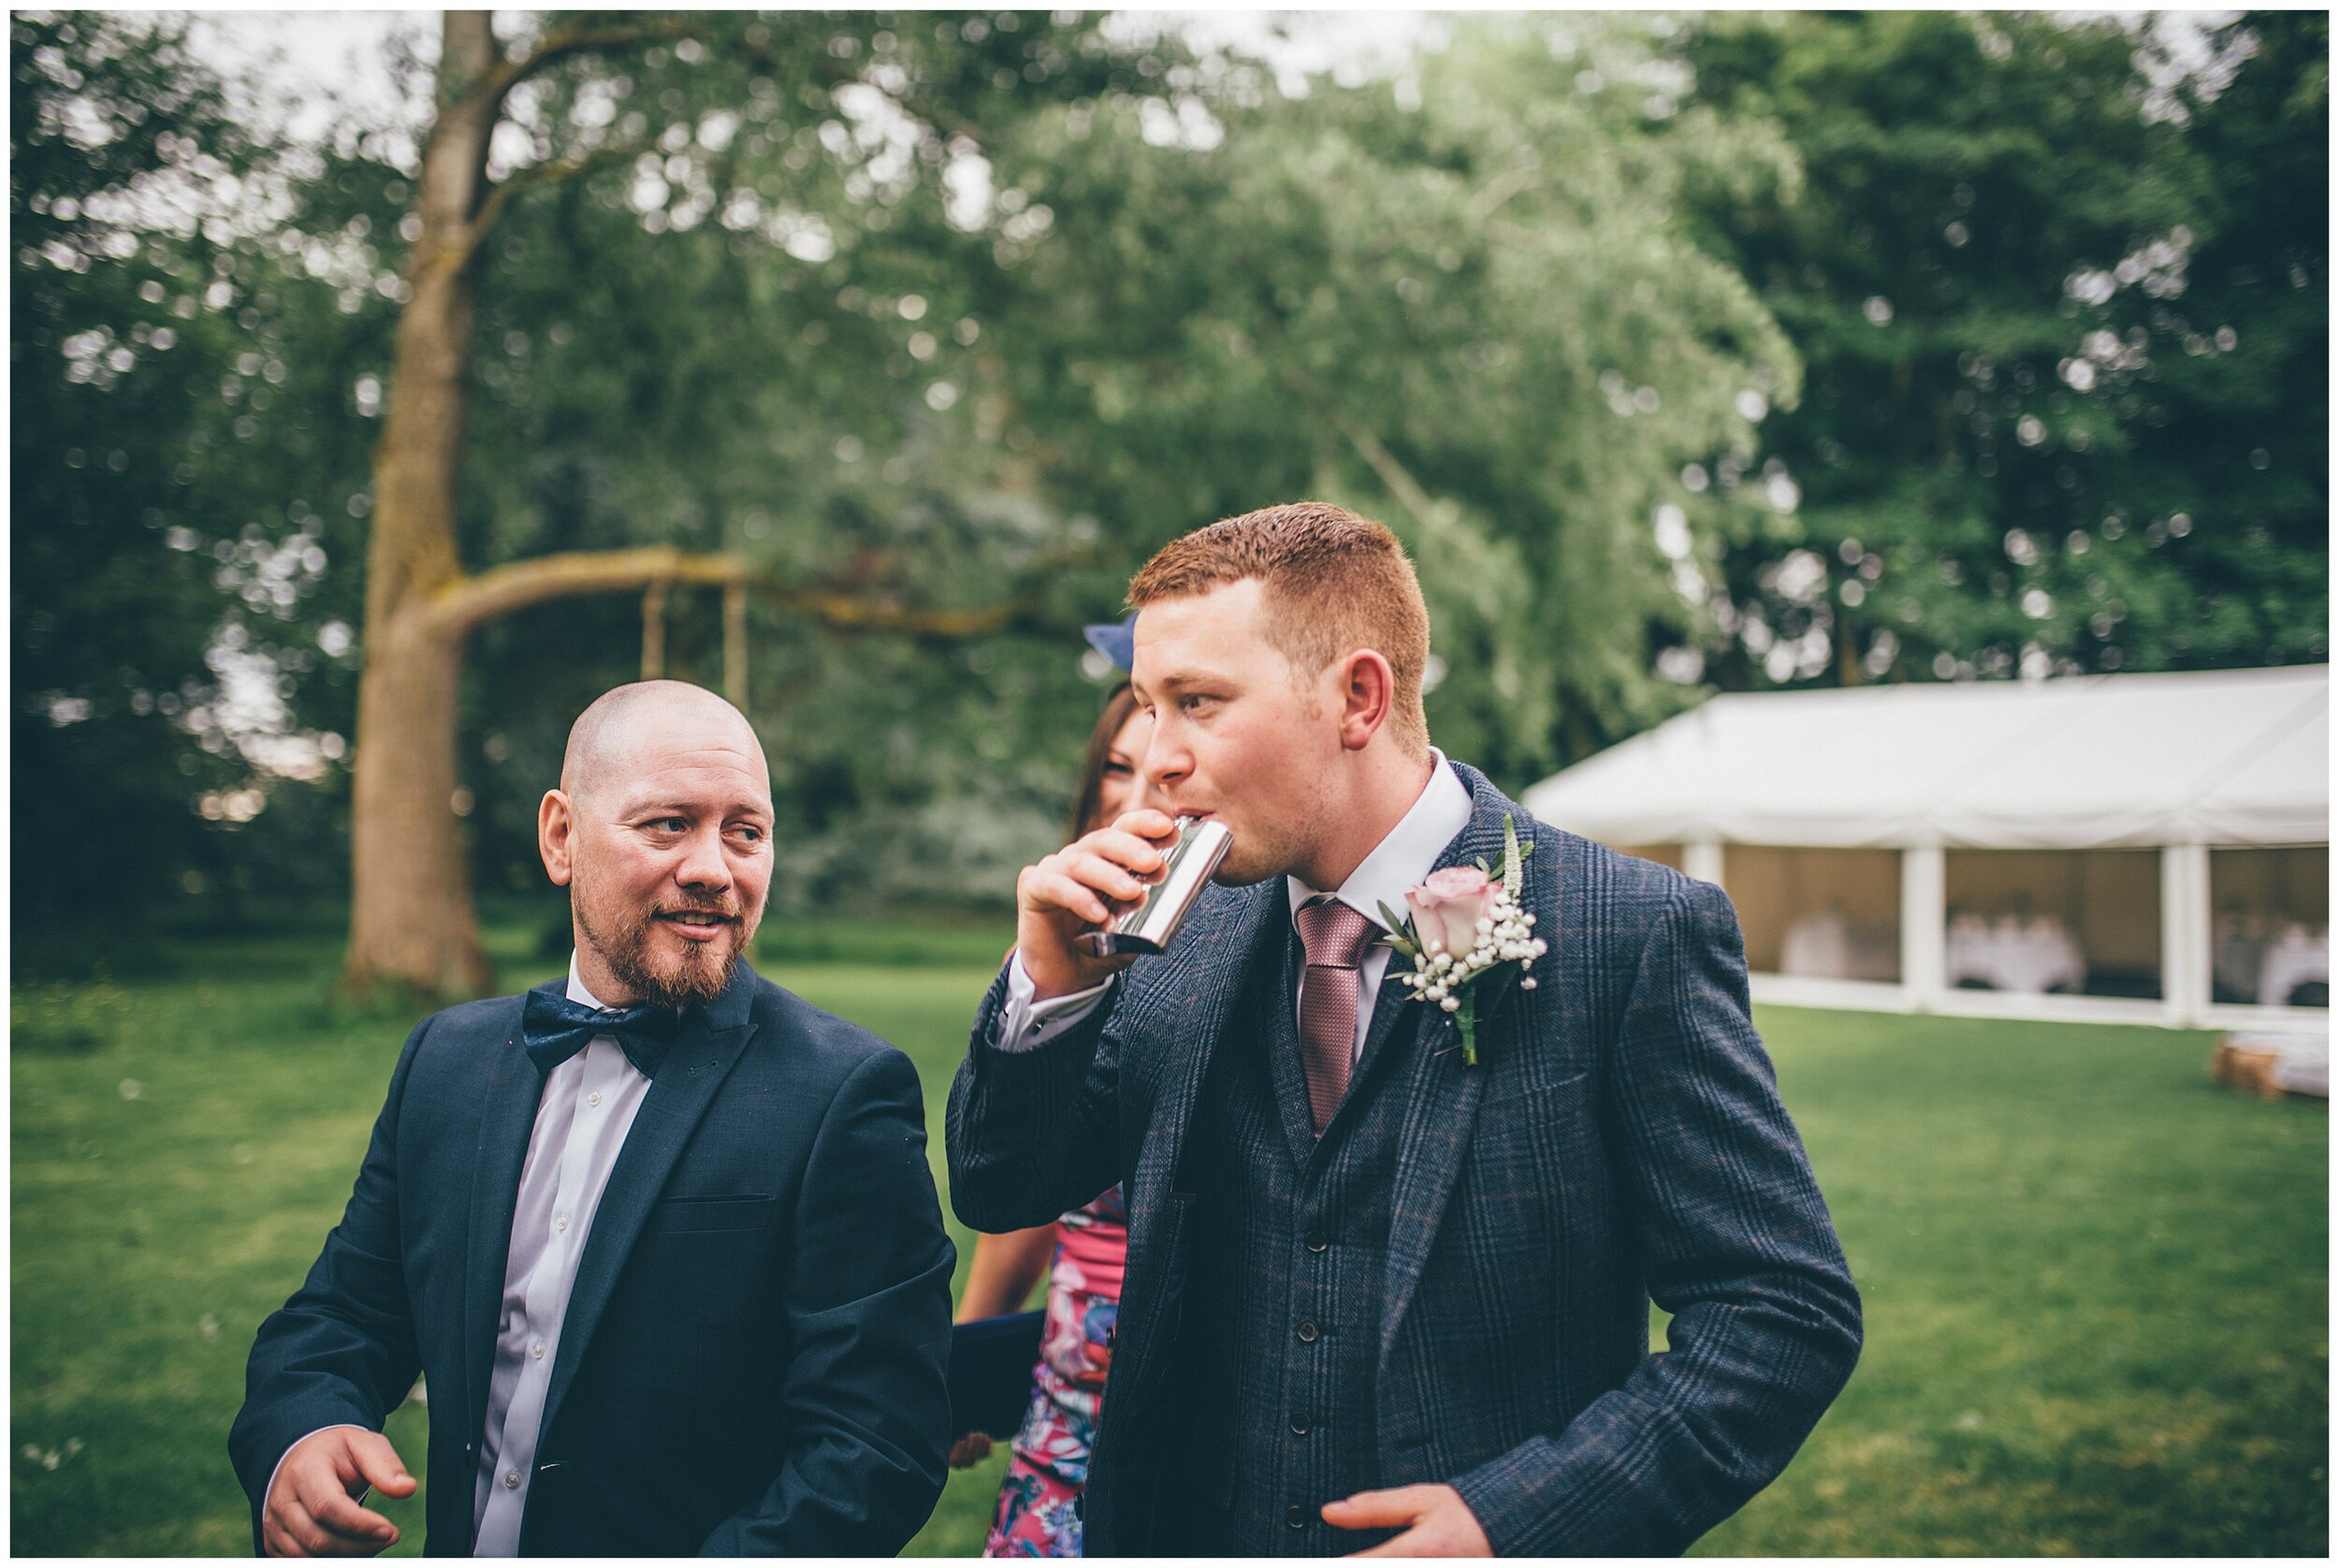 Groom drinks from a hip flask after his wedding ceremony at Chester wedding venue.